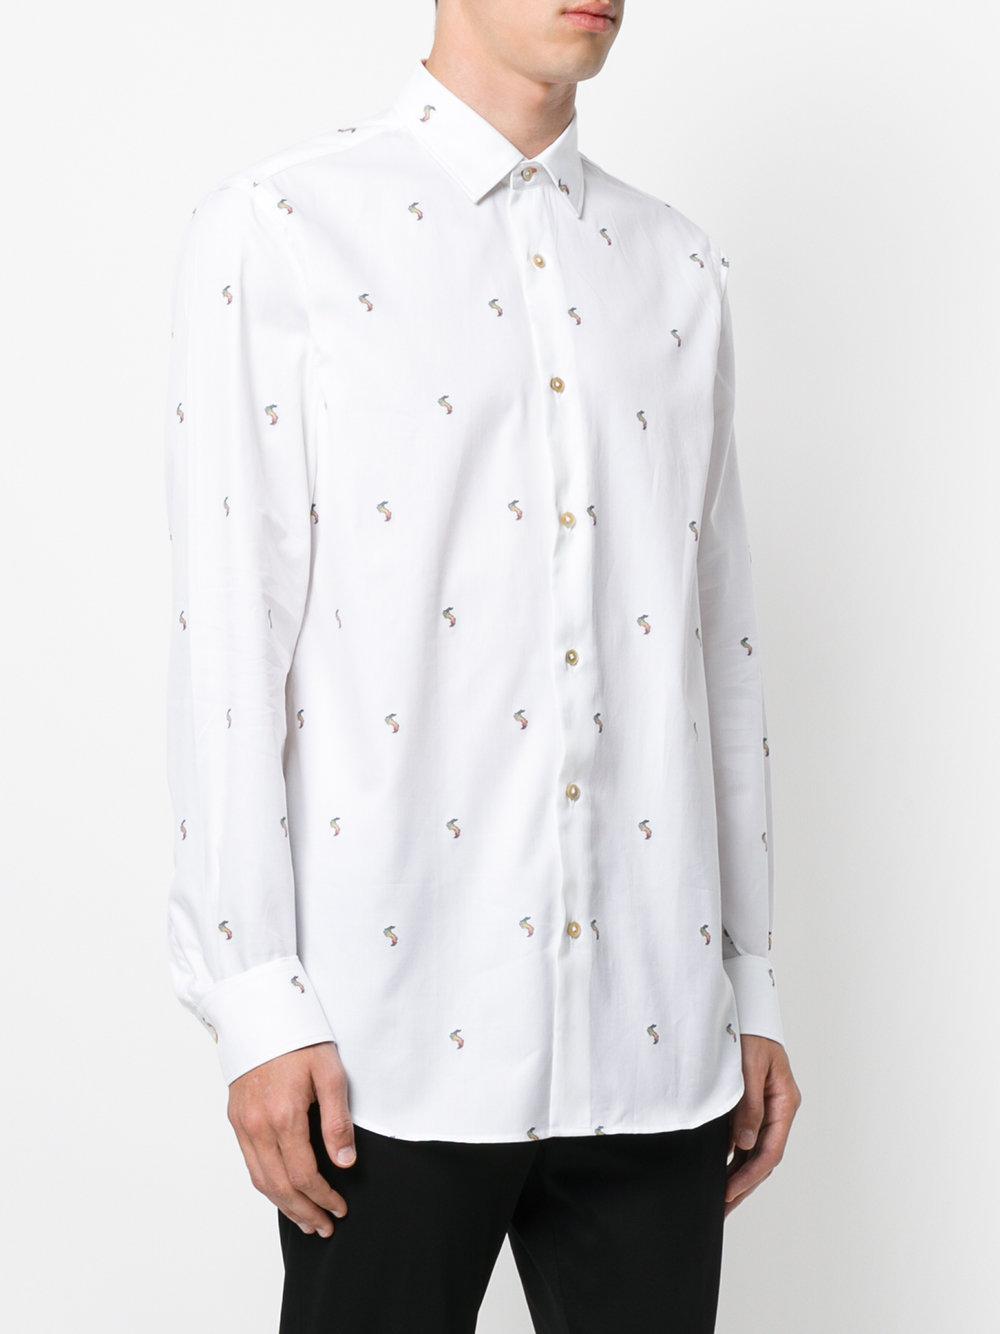 Lyst - Paul Smith Embroidered Rabbit Shirt in White for Men